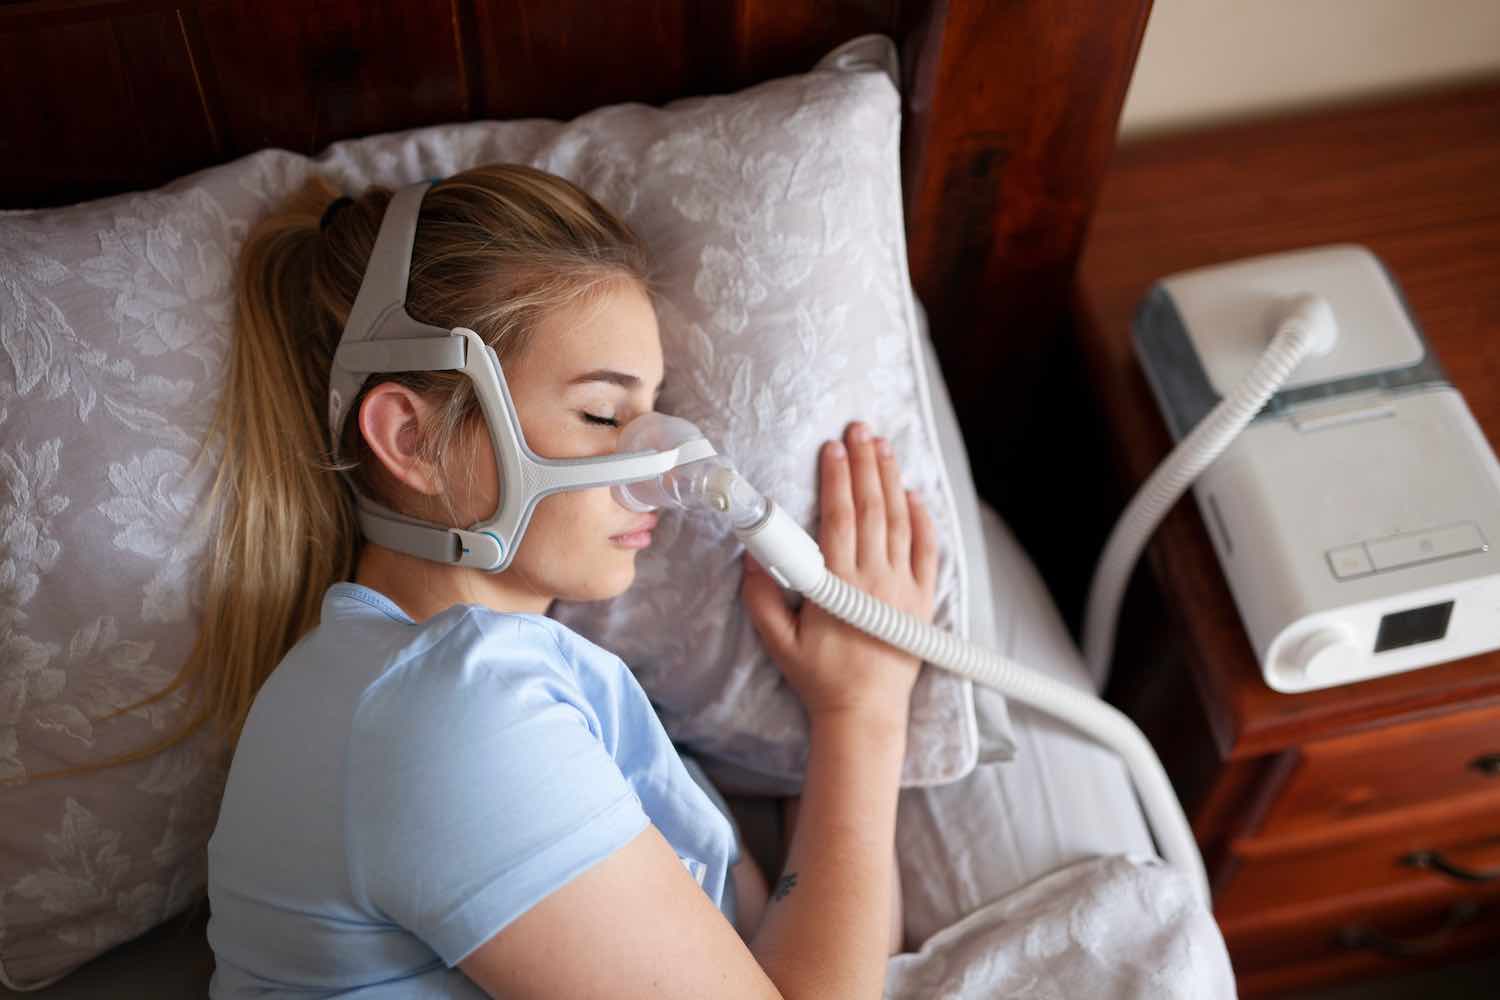 This is how sleep apnea is diagnosed and treated